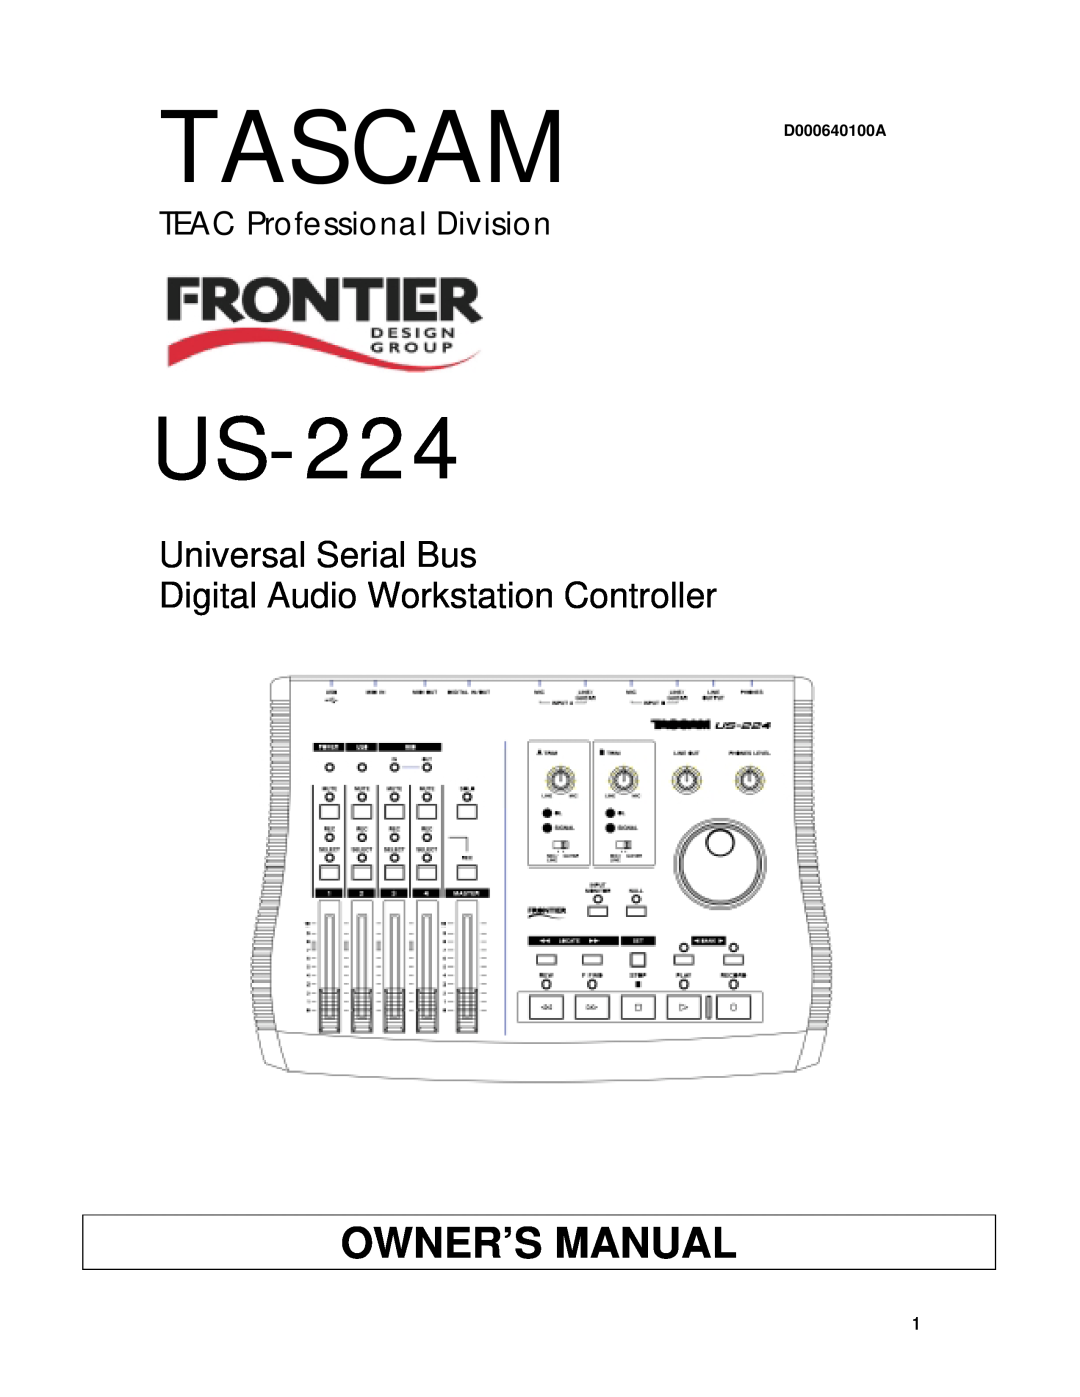 Tascam manual PERFORMING A CLEAN UNINSTALL OF THE US-224, WINDOWS 2000/WINDOWS XP, Uninstall procedure 